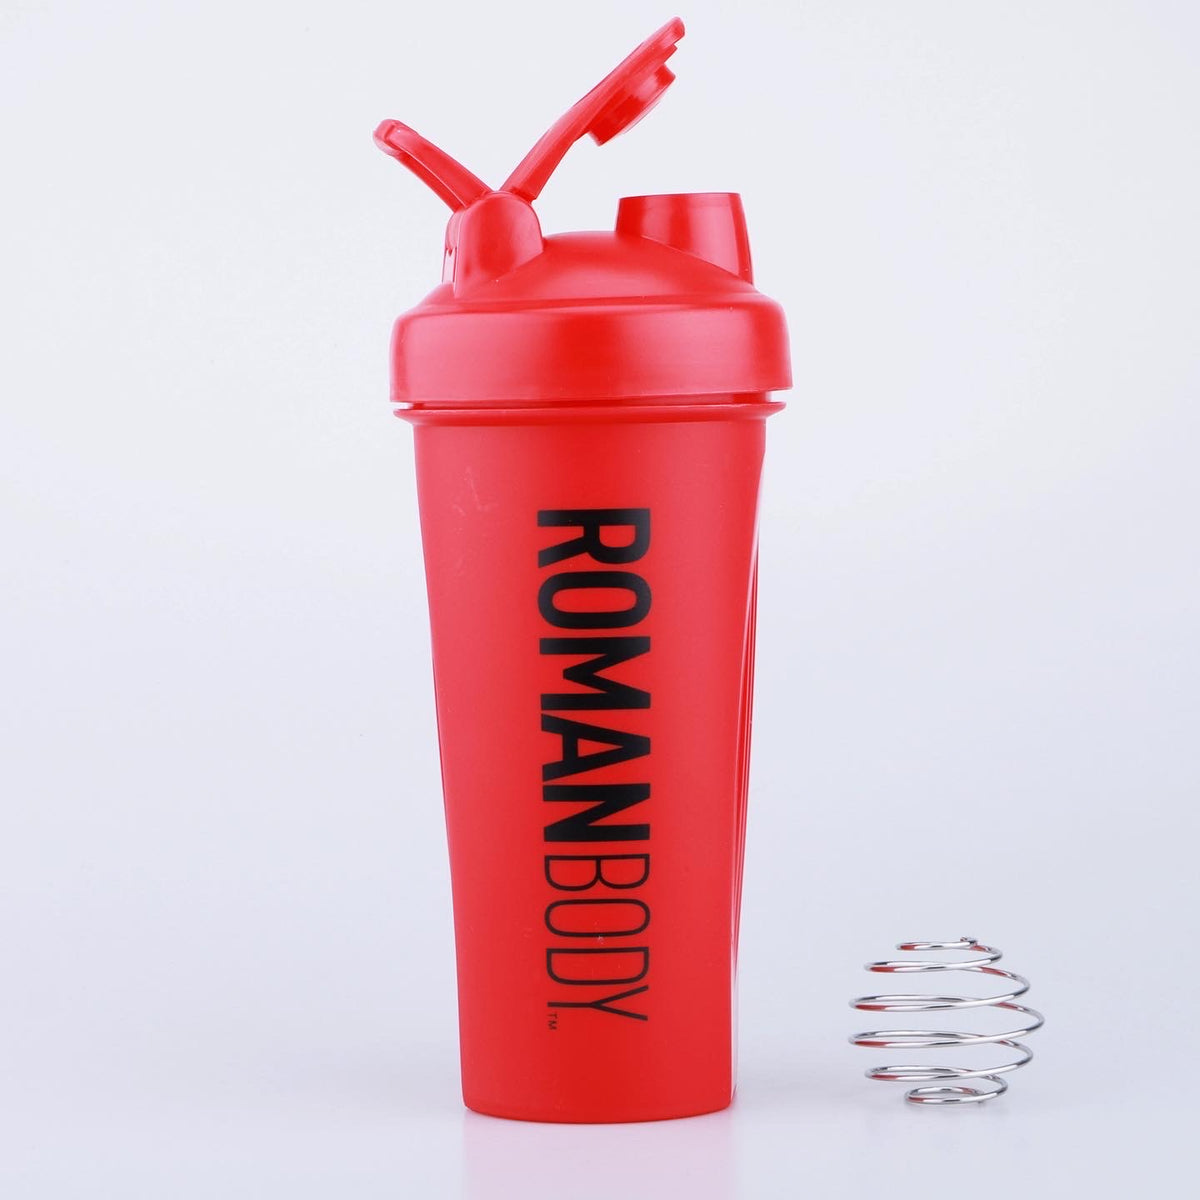 Pkgd Poly Shakers - 512 Strand (Red)